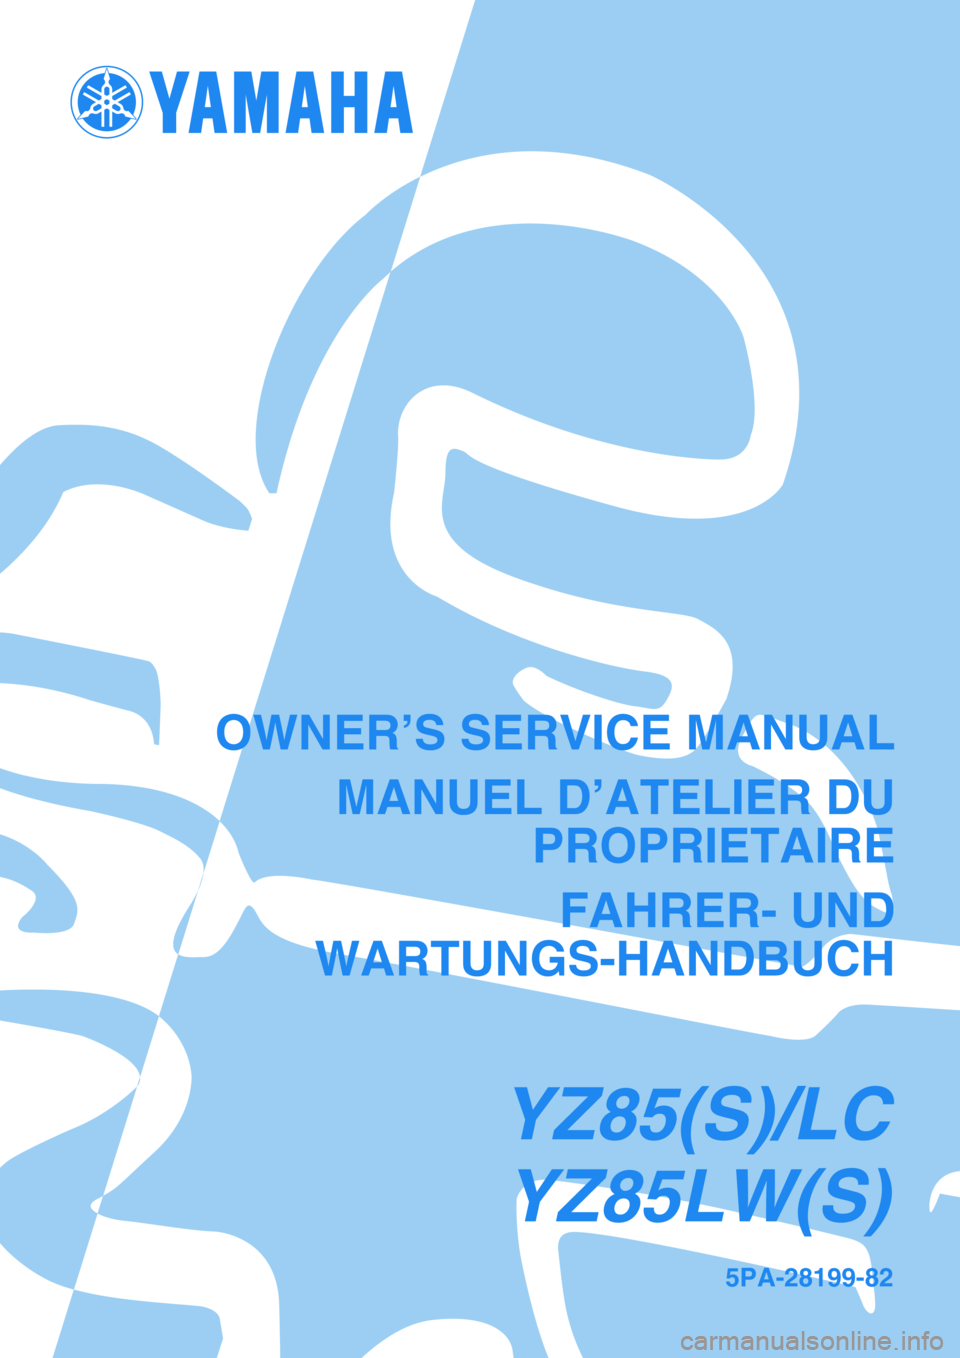 YAMAHA YZ85 2004  Notices Demploi (in French) 5PA-28199-82
OWNER’S SERVICE MANUAL
MANUEL D’ATELIER DU
PROPRIETAIRE
FAHRER- UND
WARTUNGS-HANDBUCH
YZ85(S)/LC
YZ85LW(S) 